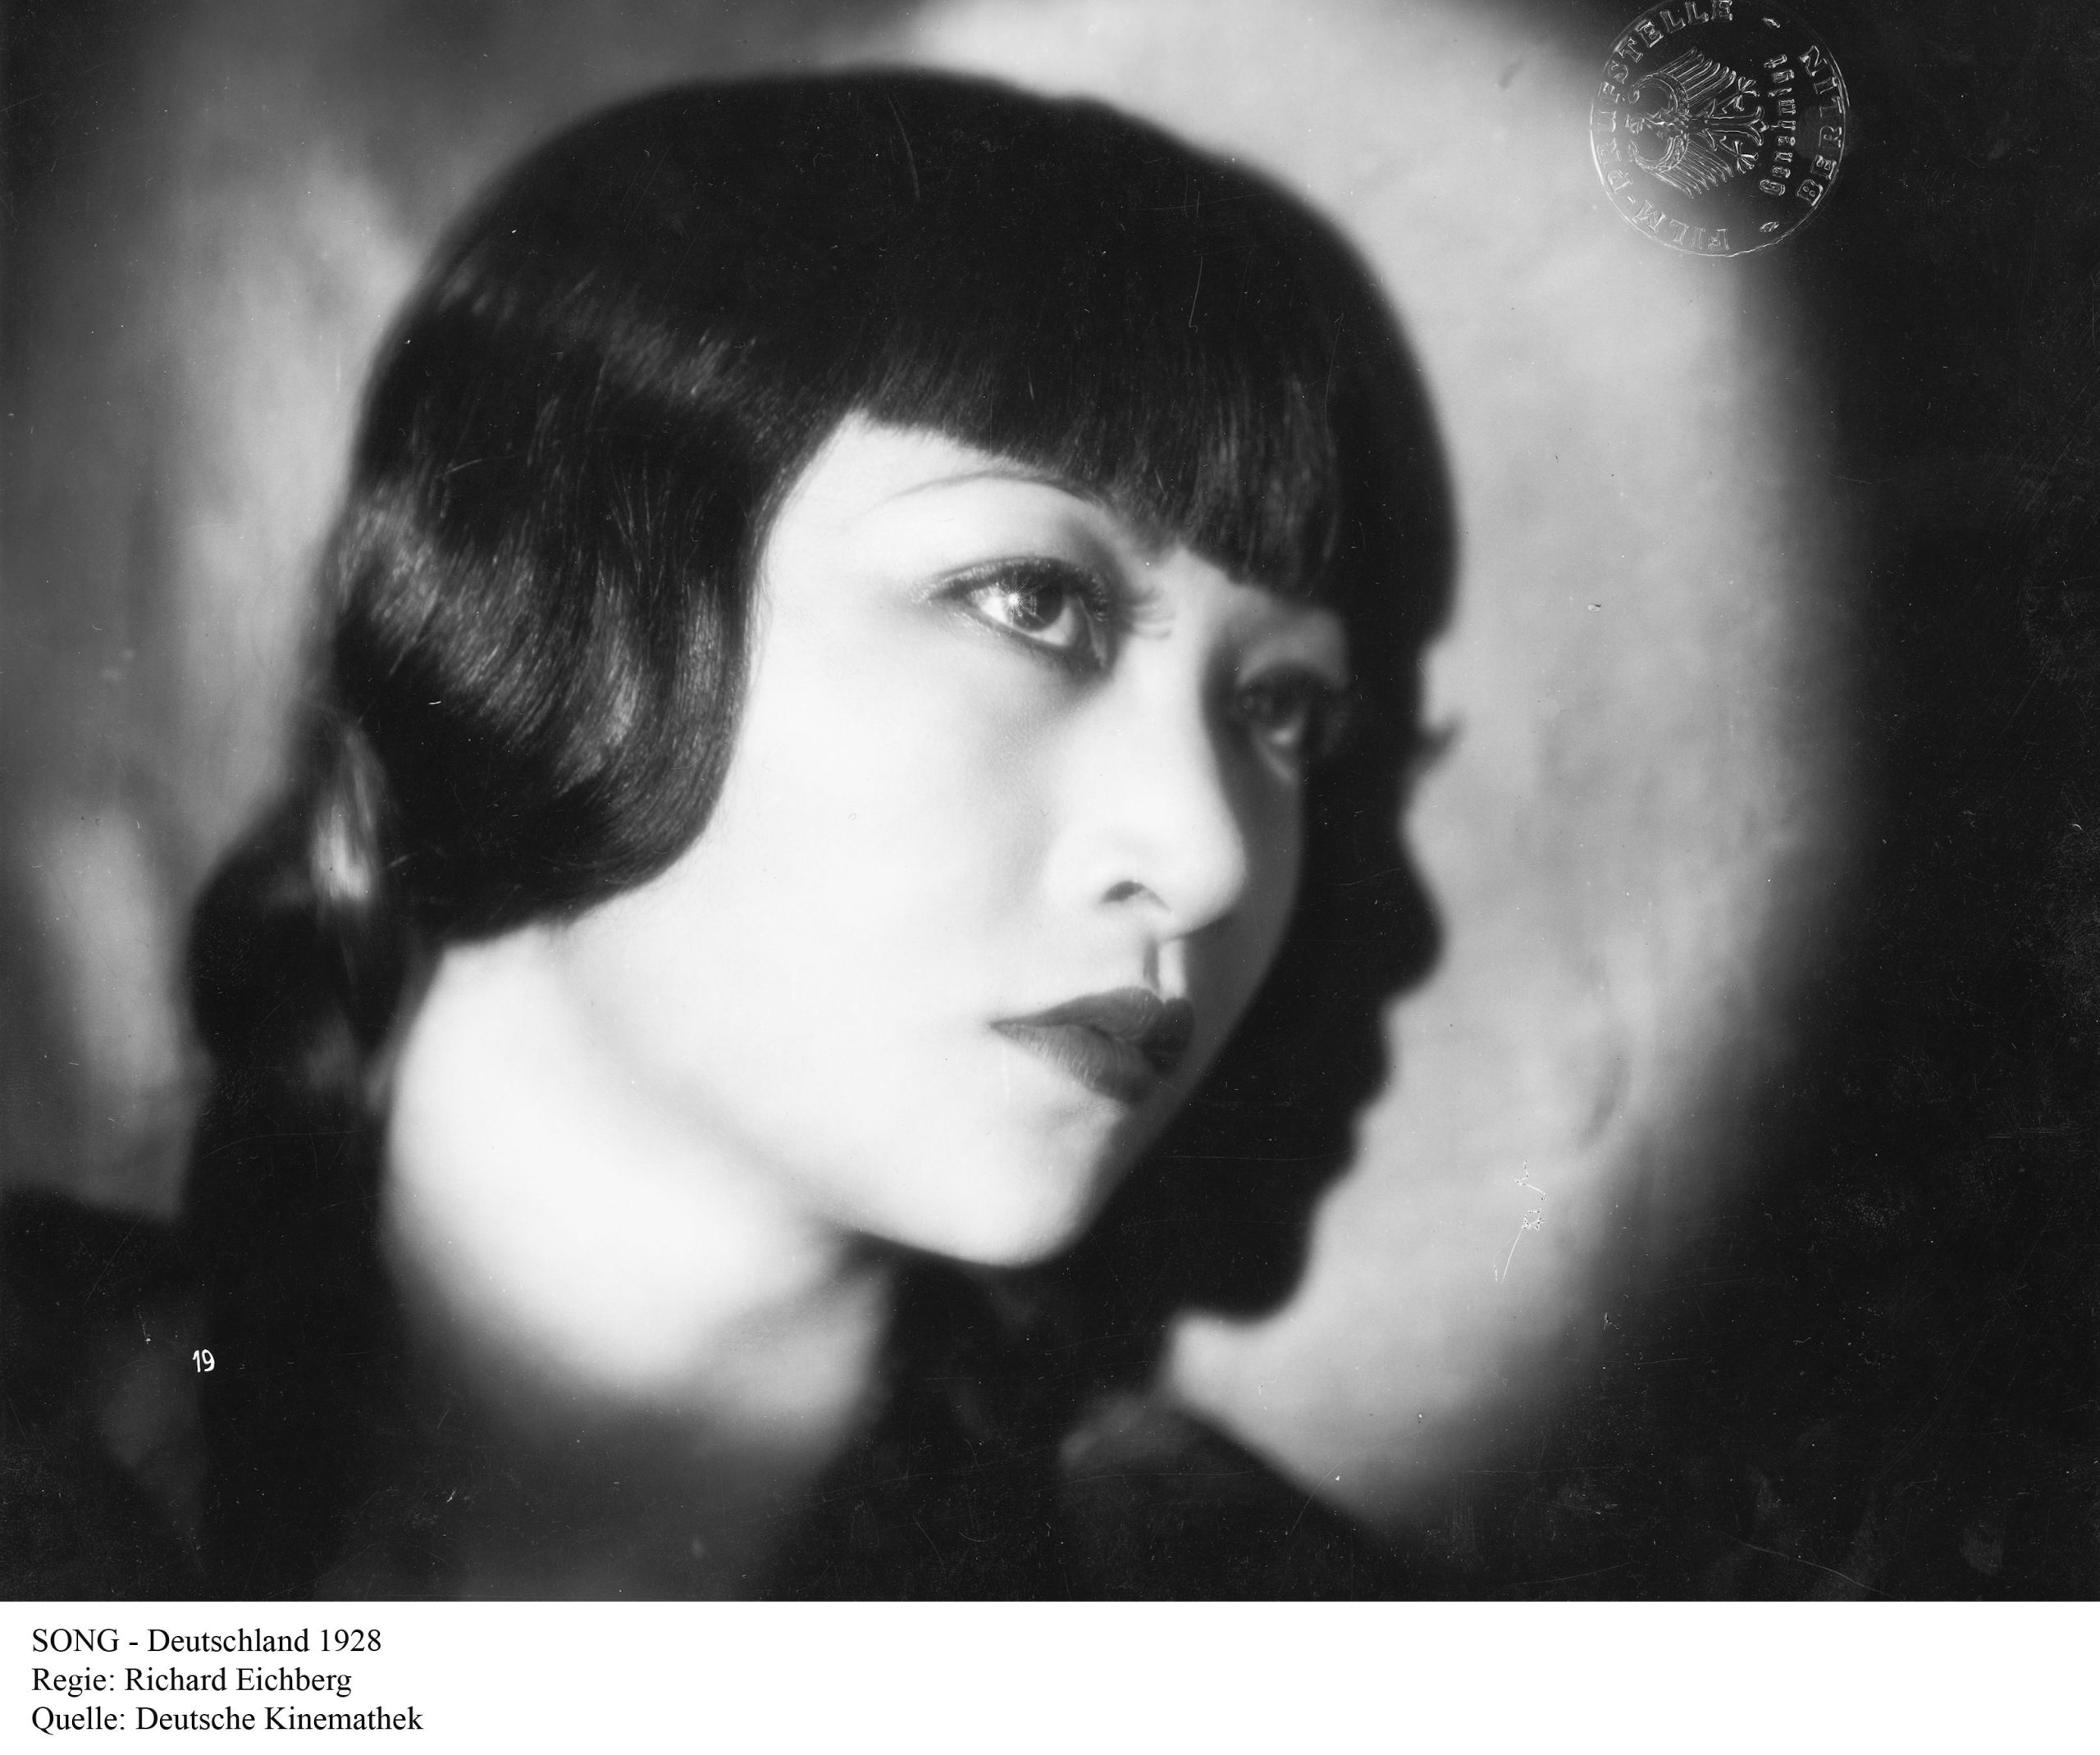 A film clip from the movie "Song." The profile of Anna May Wong is captured.